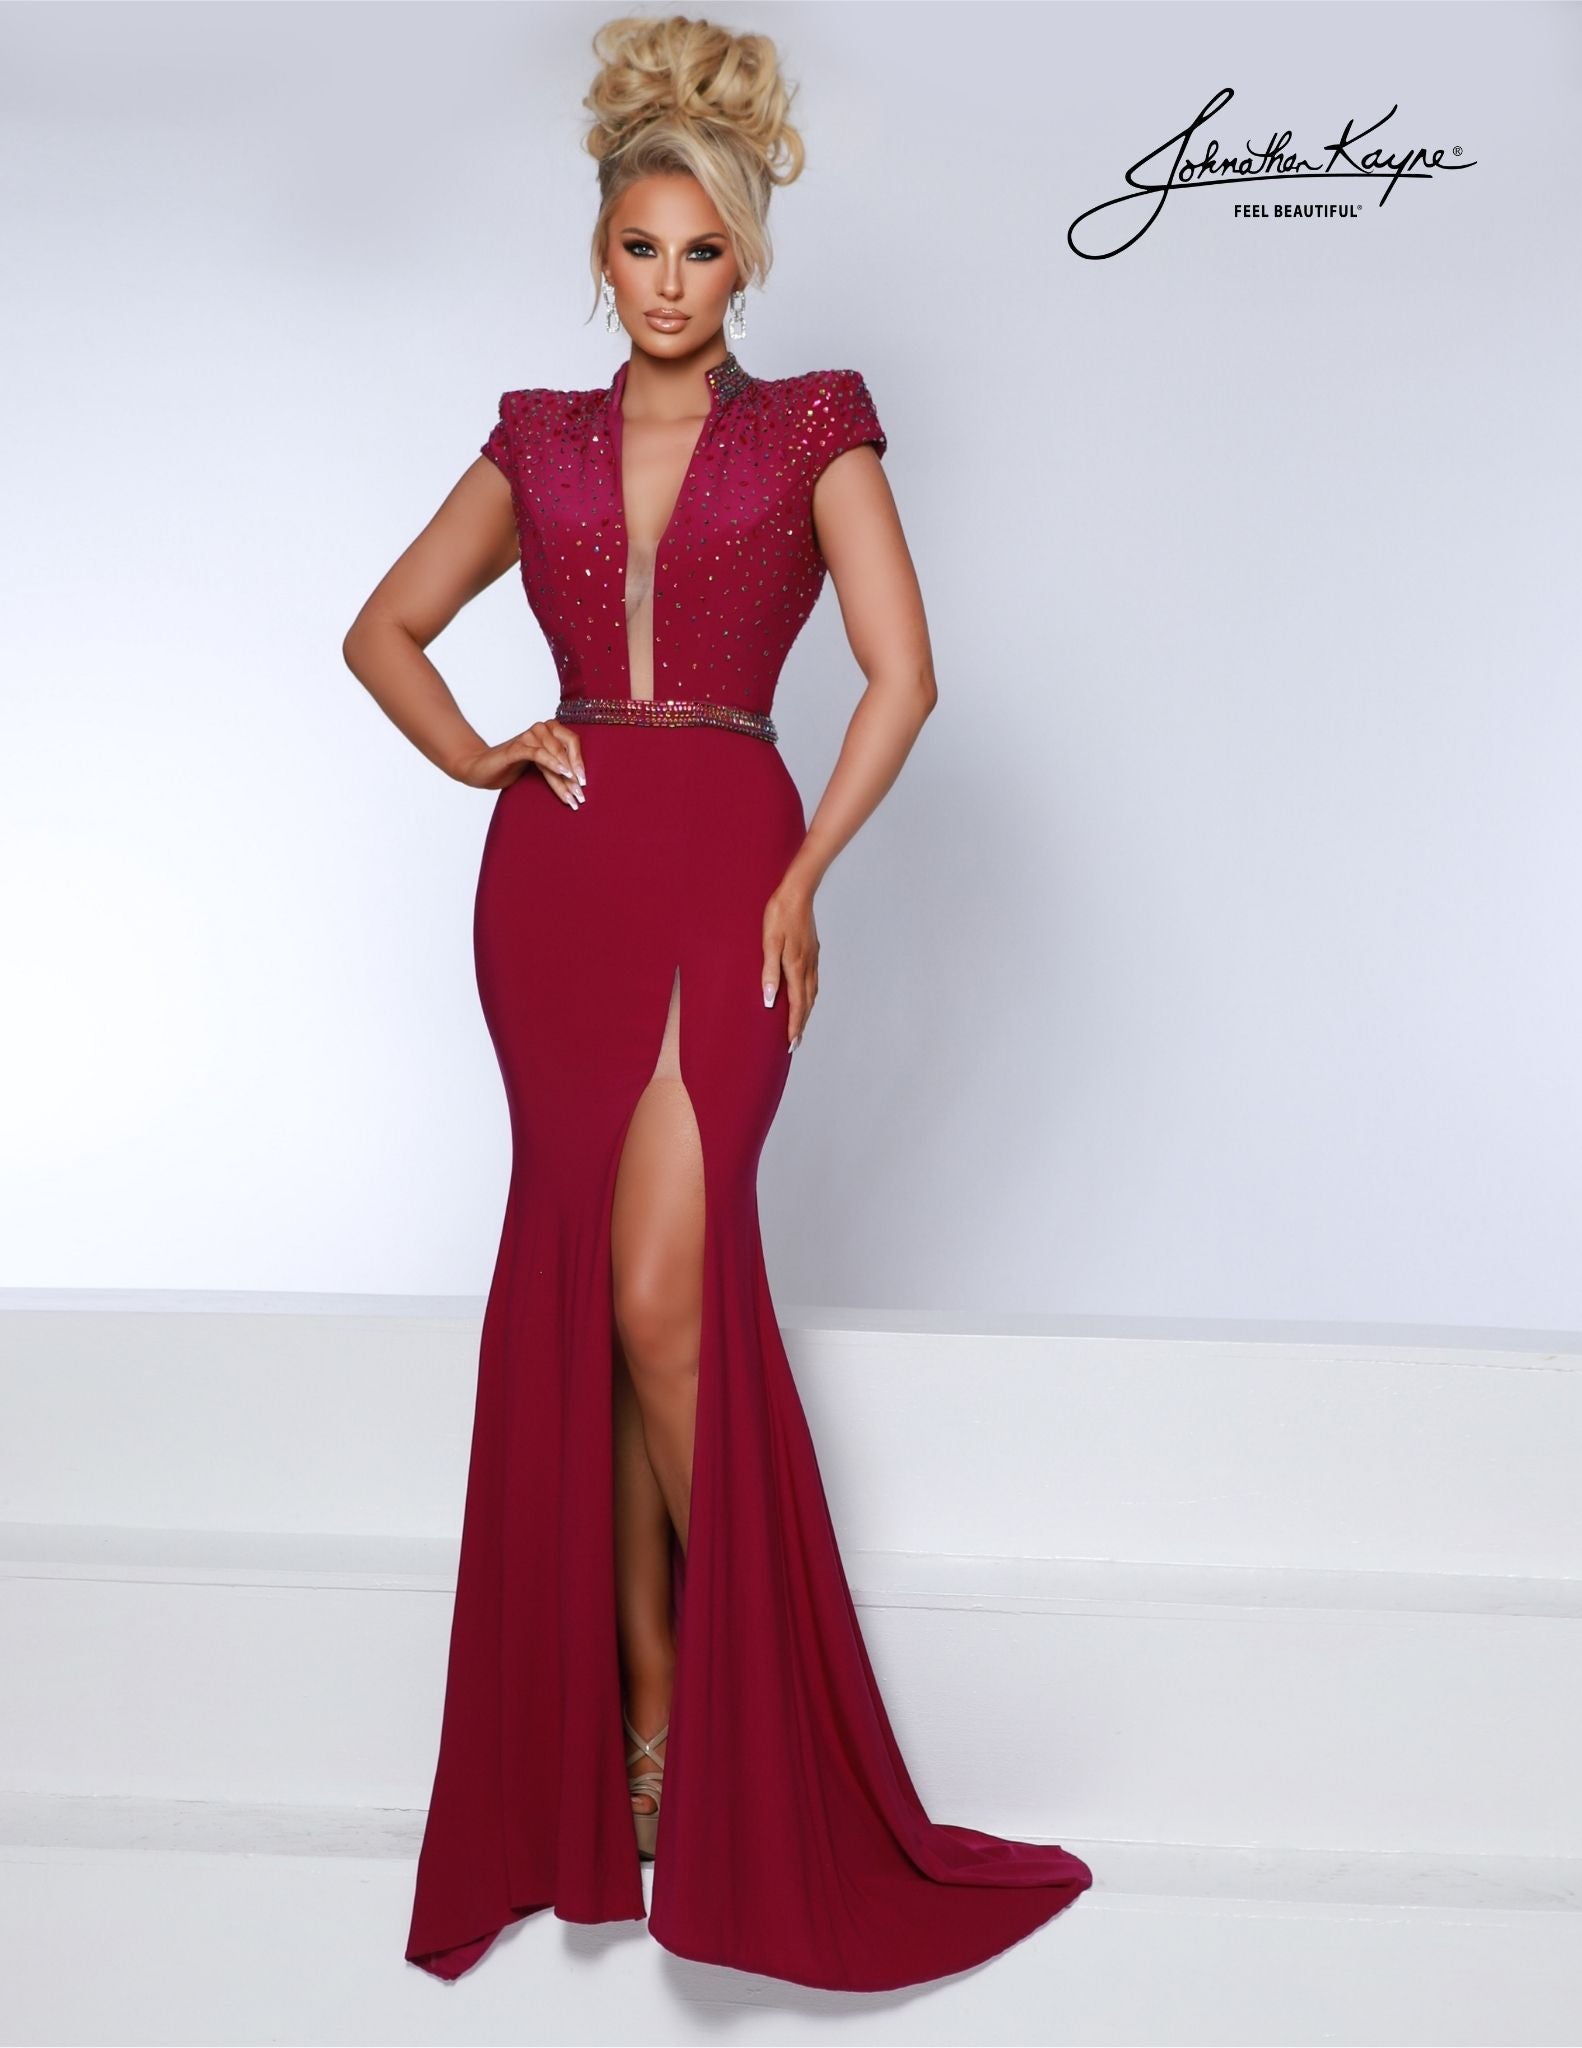 This Johnathan Kayne 2849 maxi dress is perfect for formal occasions. Crafted from luxurious jersey, the mermaid silhouette and low neckline offers timeless elegance, while draped shoulder pads adds subtle detail. A dramatic side slit completes the look of this sophisticated gown. Leave a lasting impression! This matte jersey gown features the tempting low neckline, shoulder pads, and daring slit that promises to captivate and enthrall.